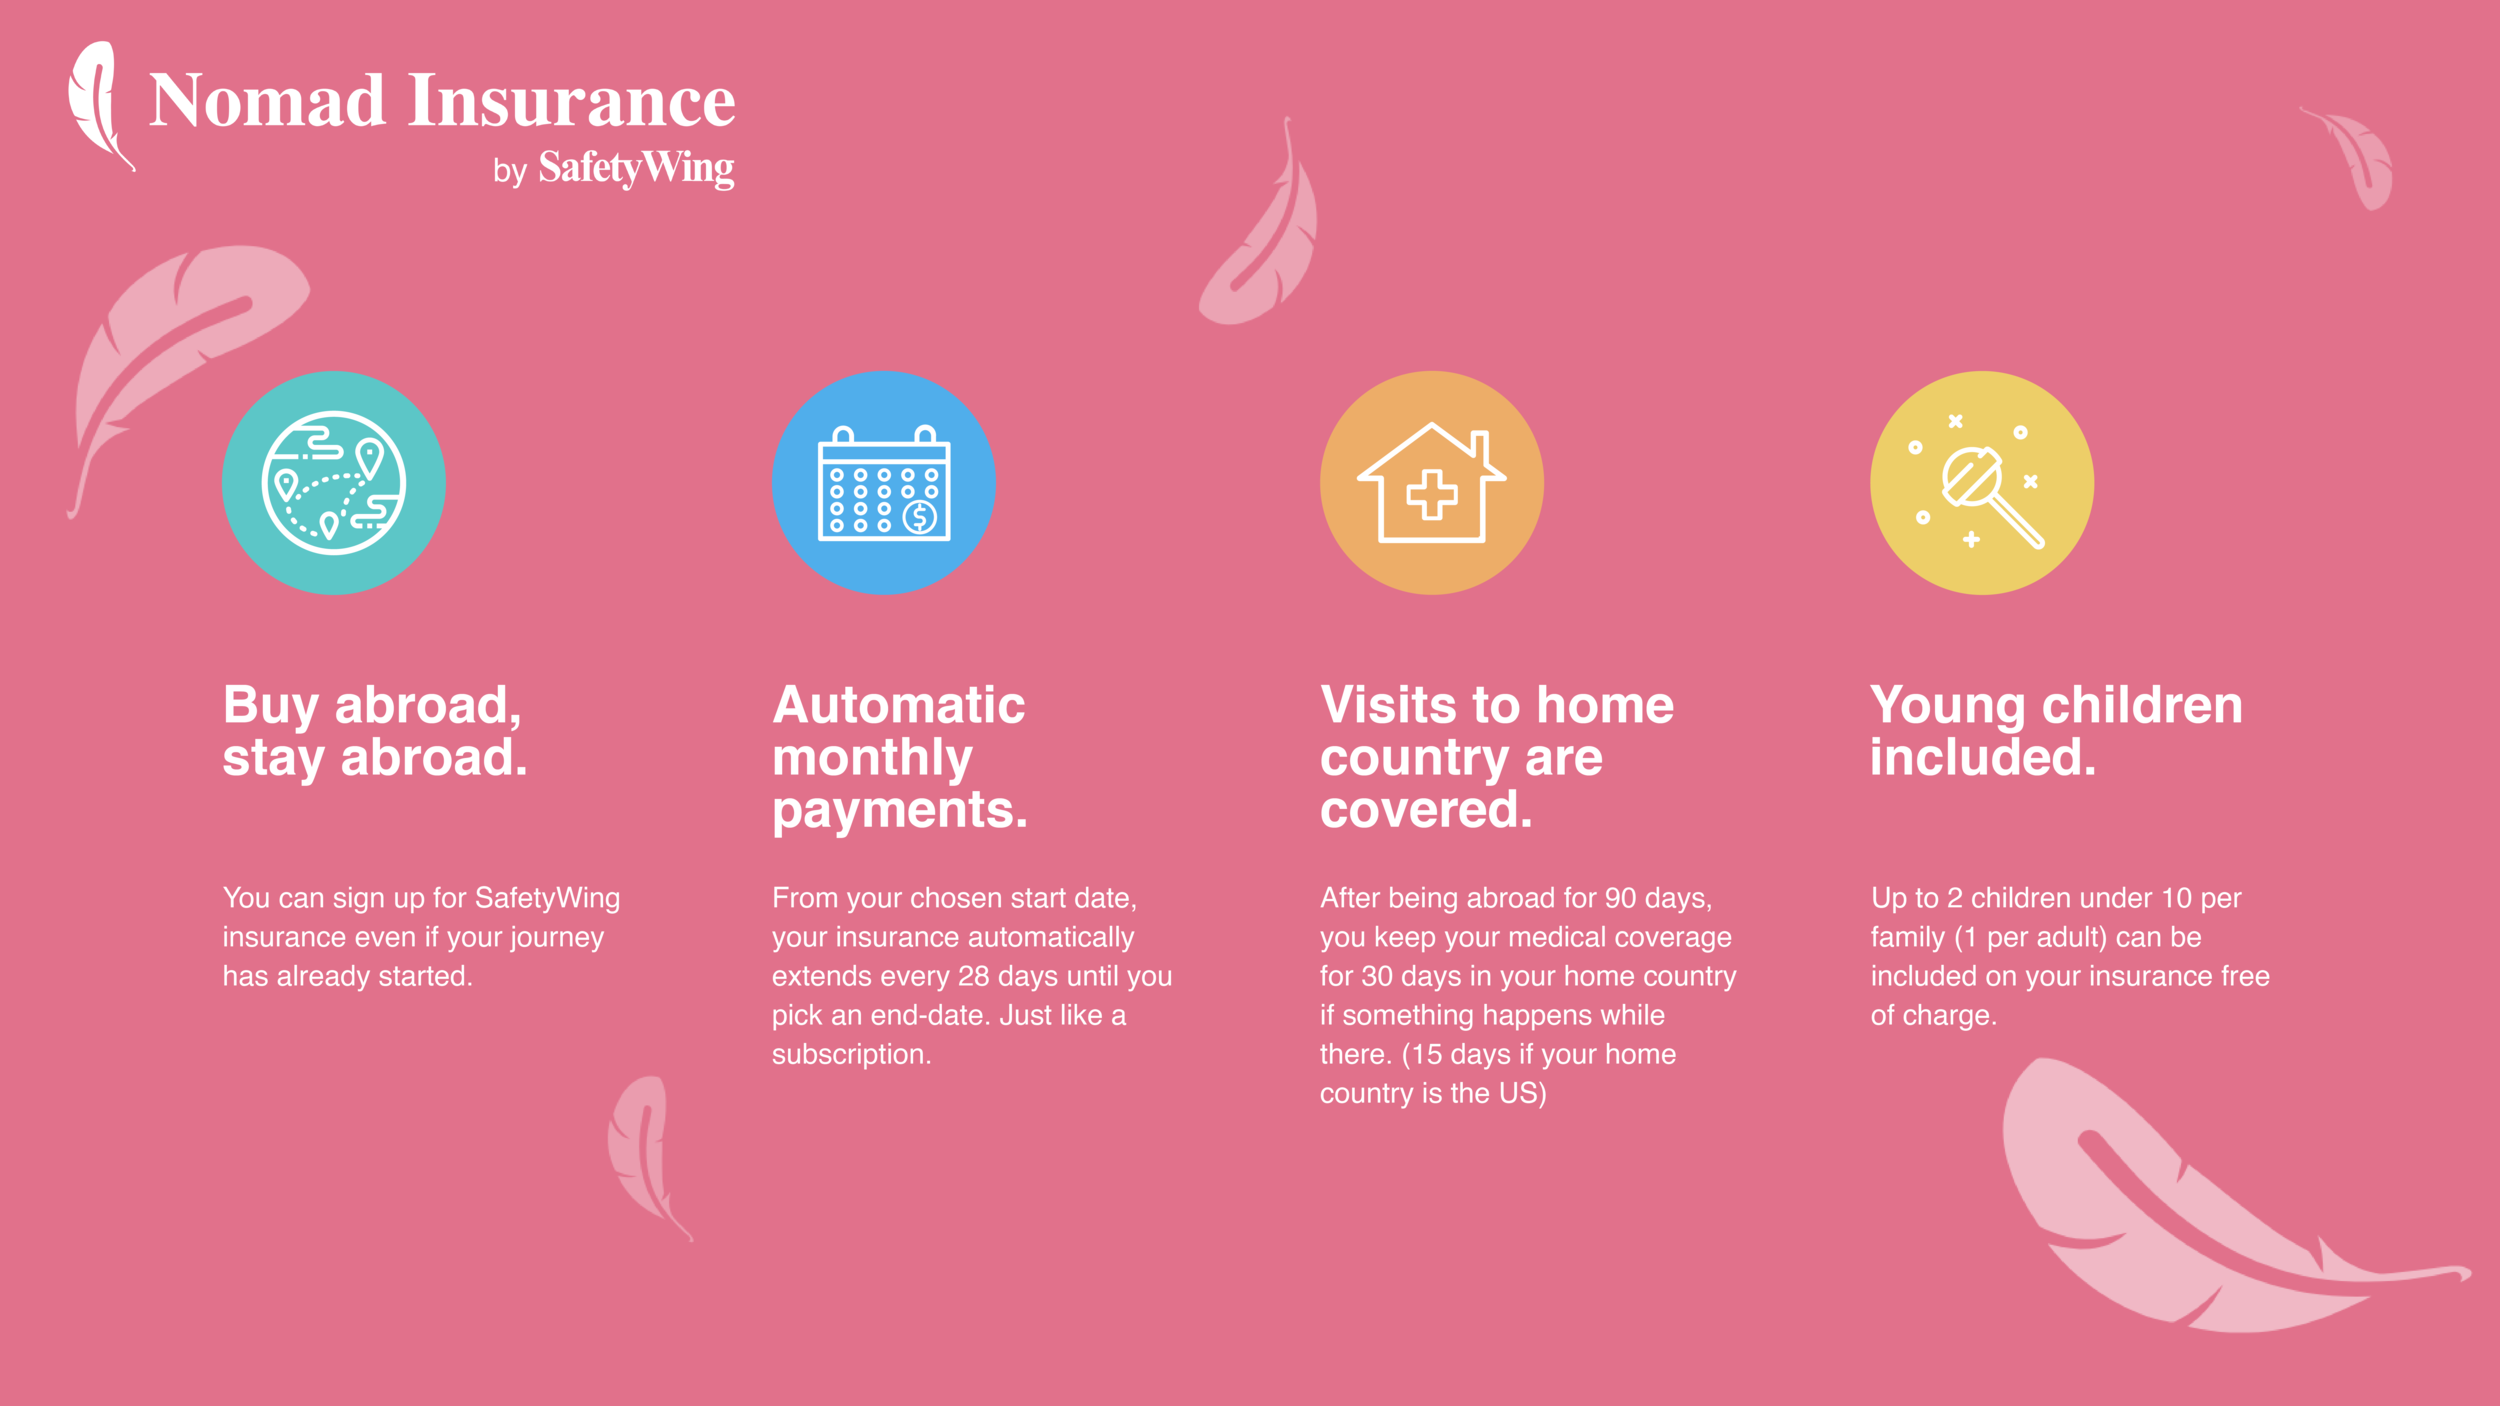 Ultimate Travel Insurance & Disabilities Guide